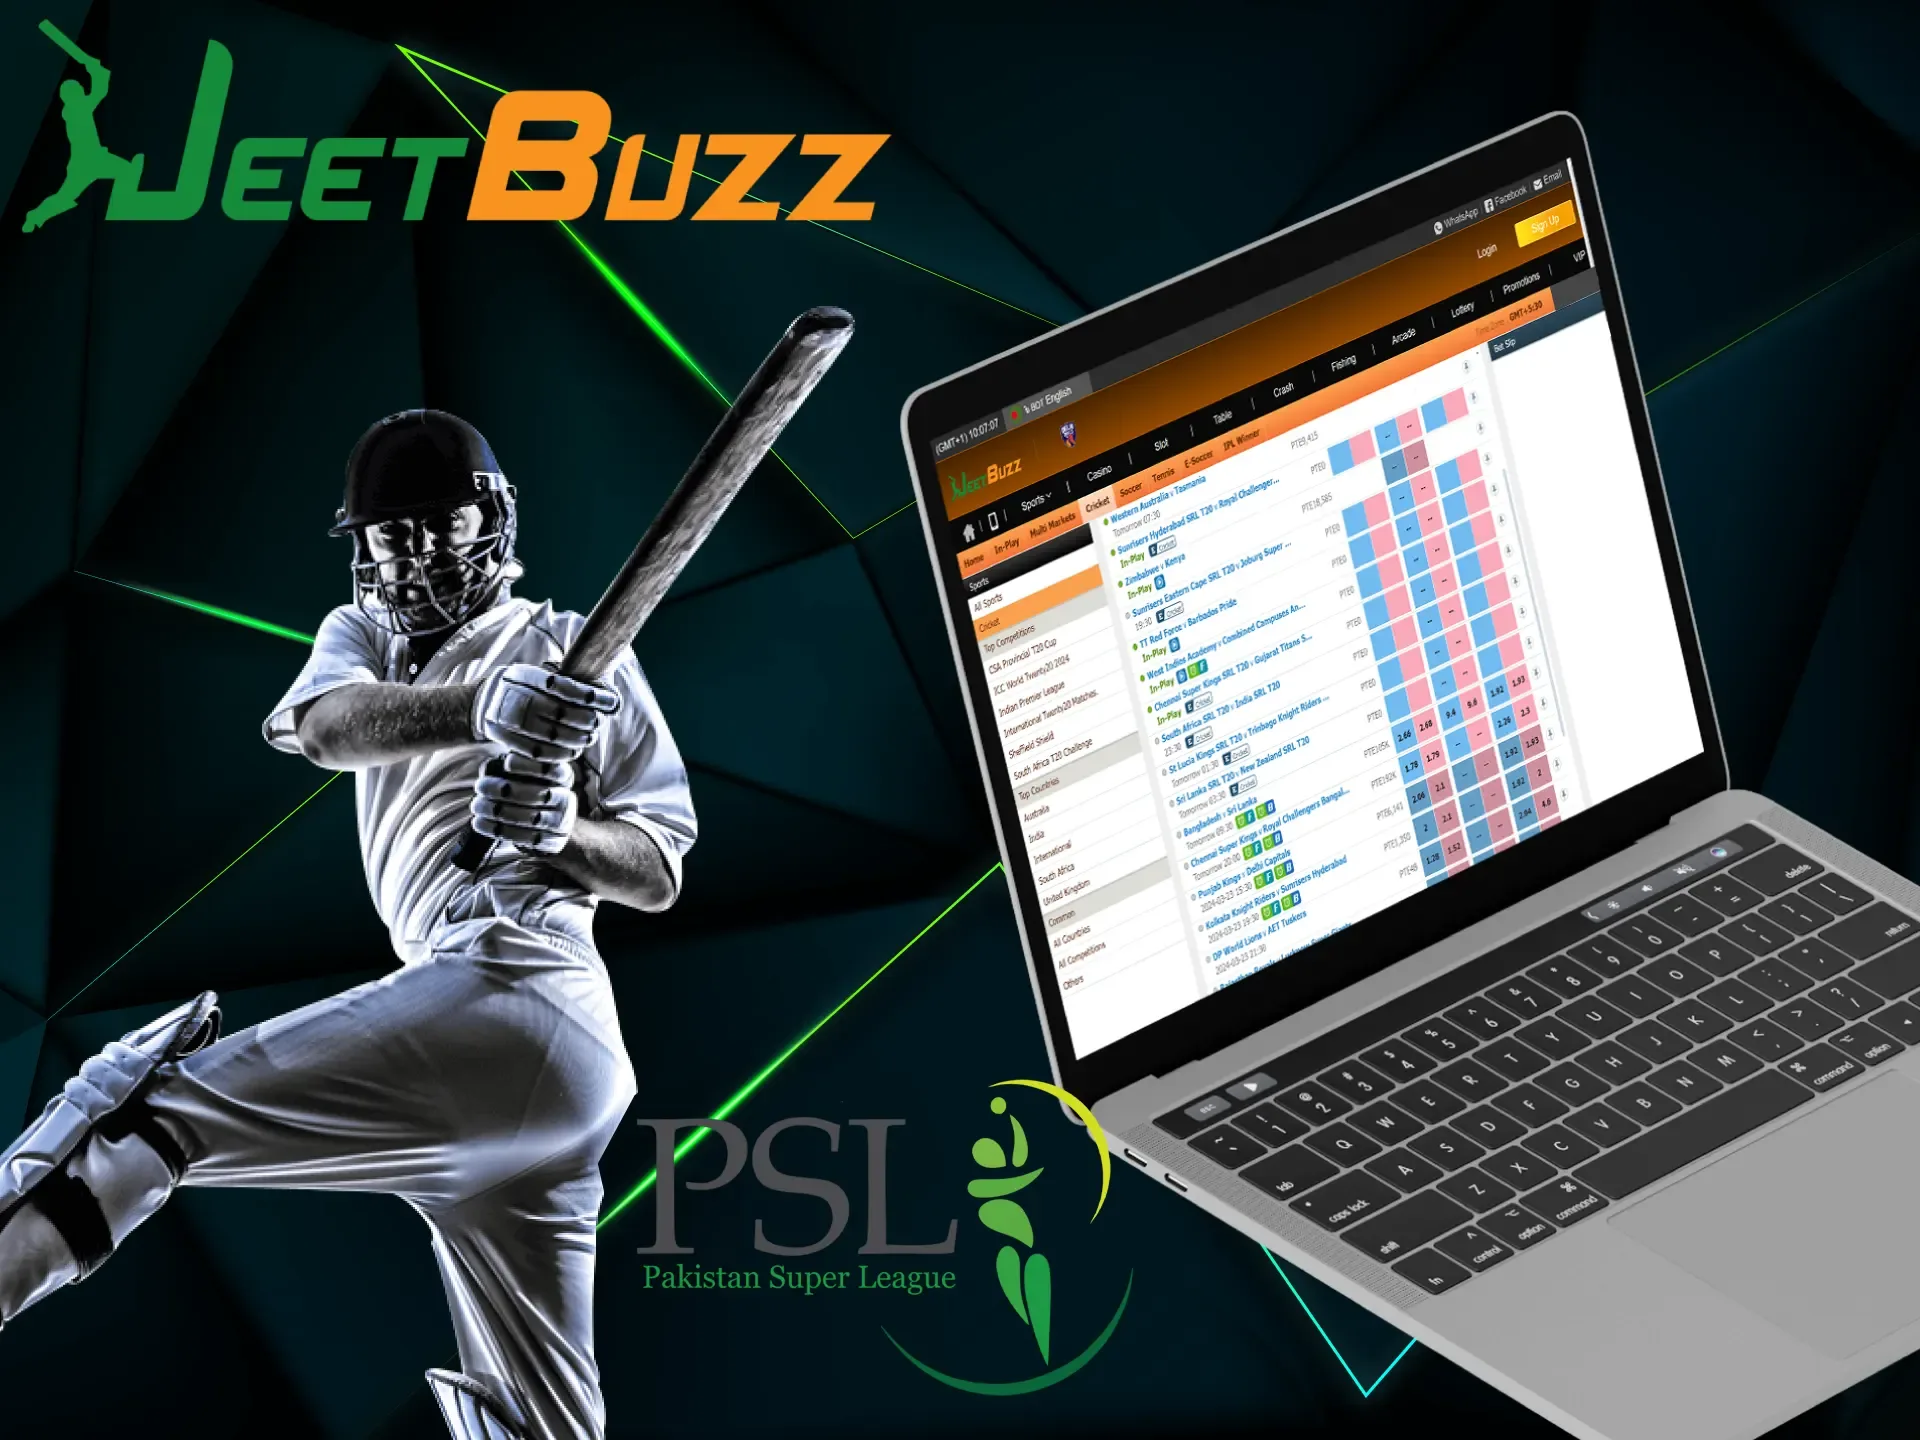 The Pakistan Super League is held annually and JeetBuzz offers to make time to place bets.